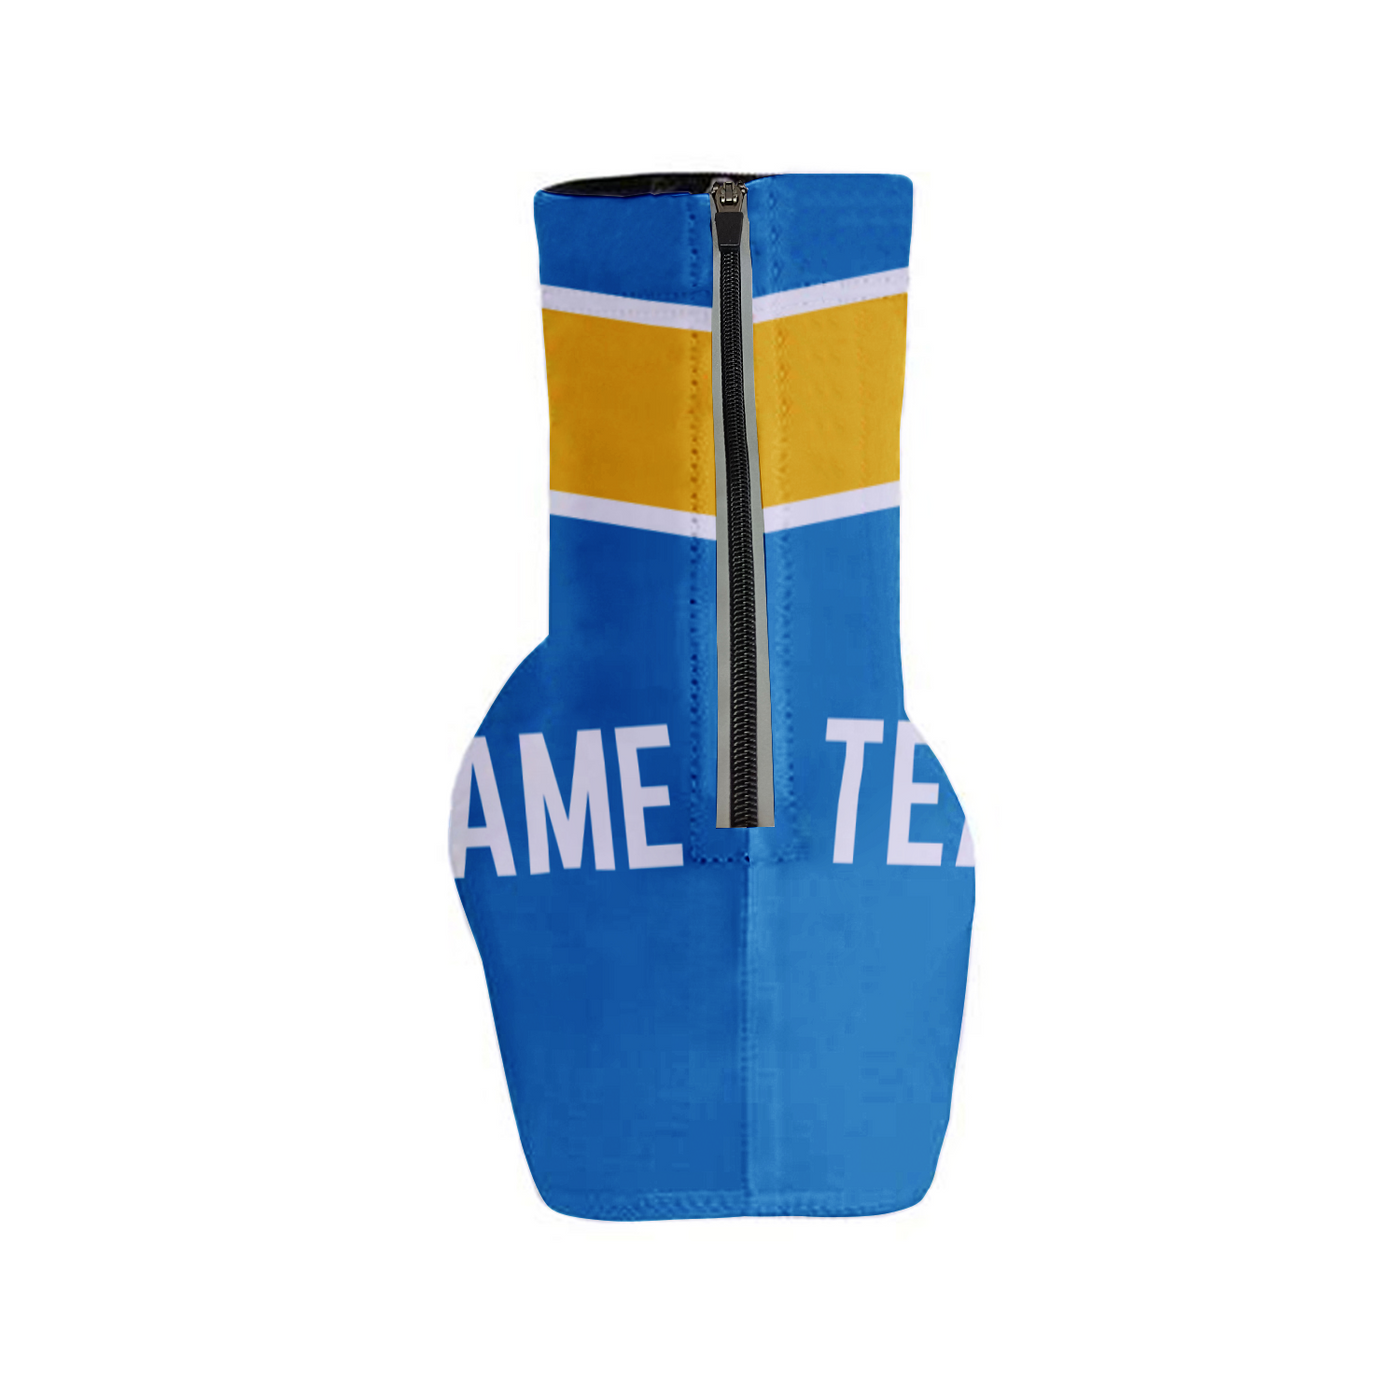 Customized Los Angeles Cycling Shoe Covers